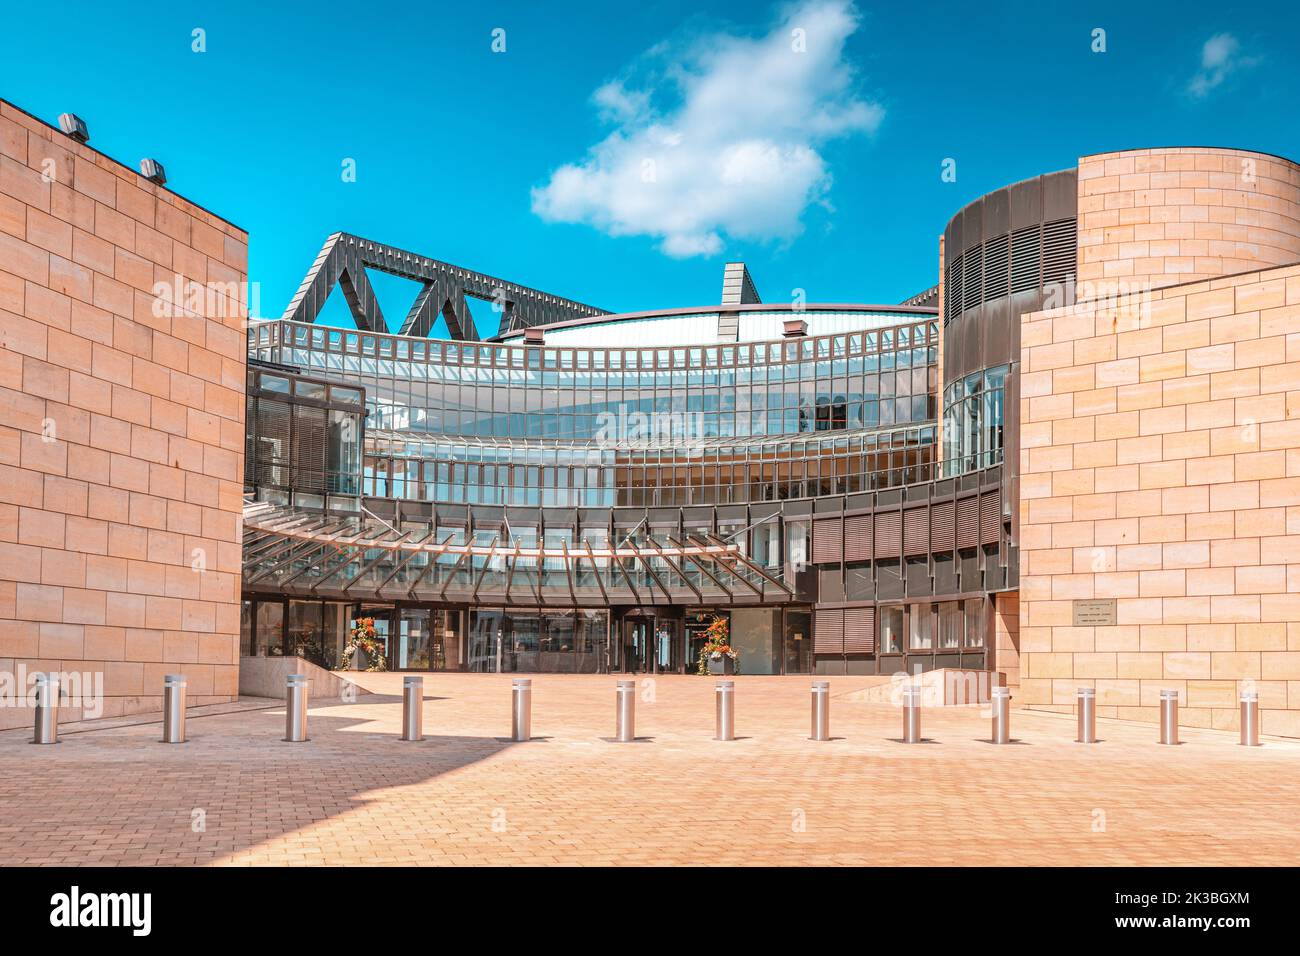 23 July 2022, Dusseldorf, Germany: Landtag or Regional Administrative institution of Nordrhein Westfalen. Panoramic view of parliament building Stock Photo